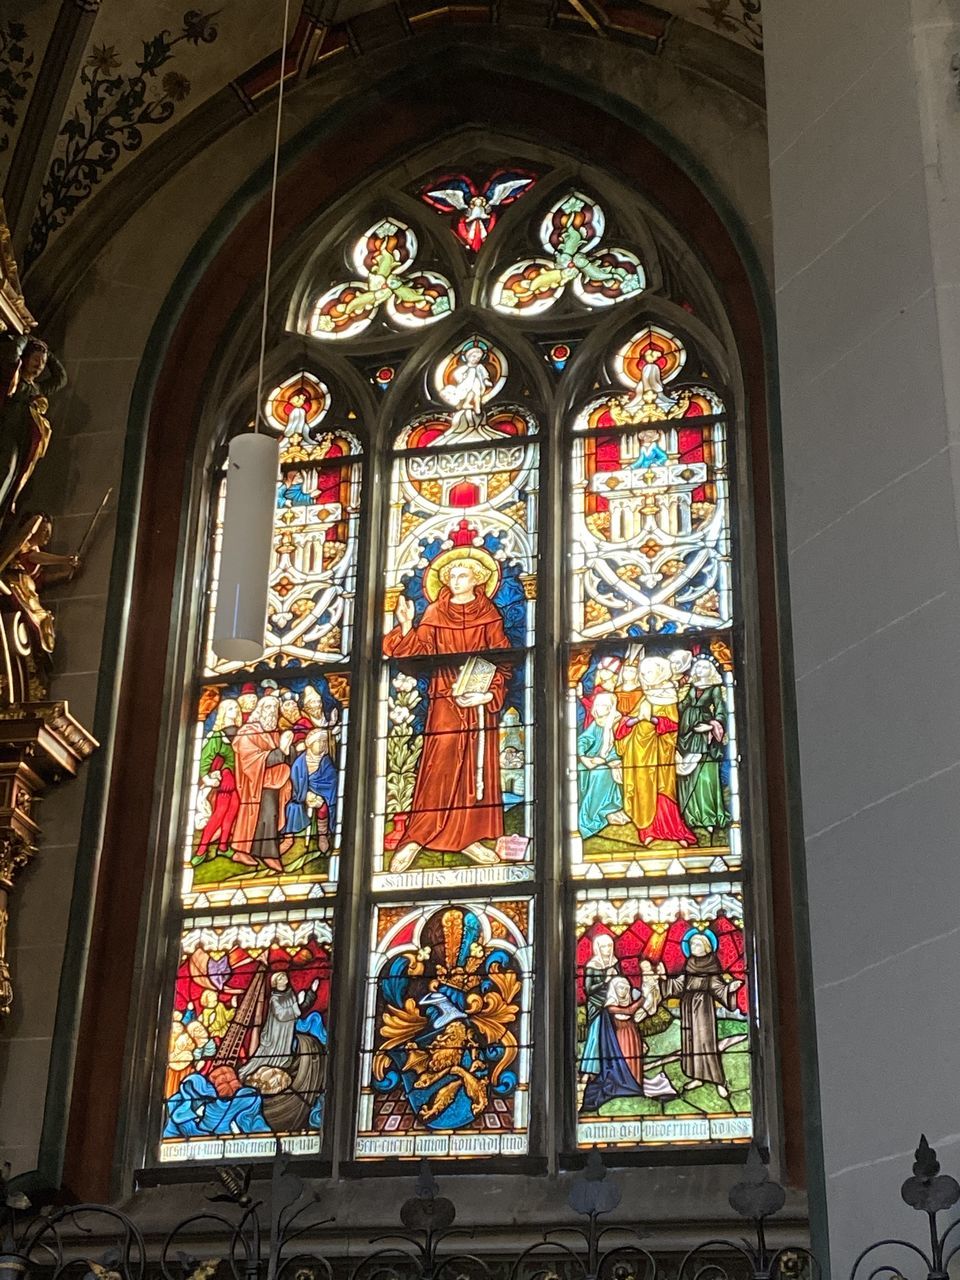 VIEW OF ORNATE WINDOW IN TEMPLE